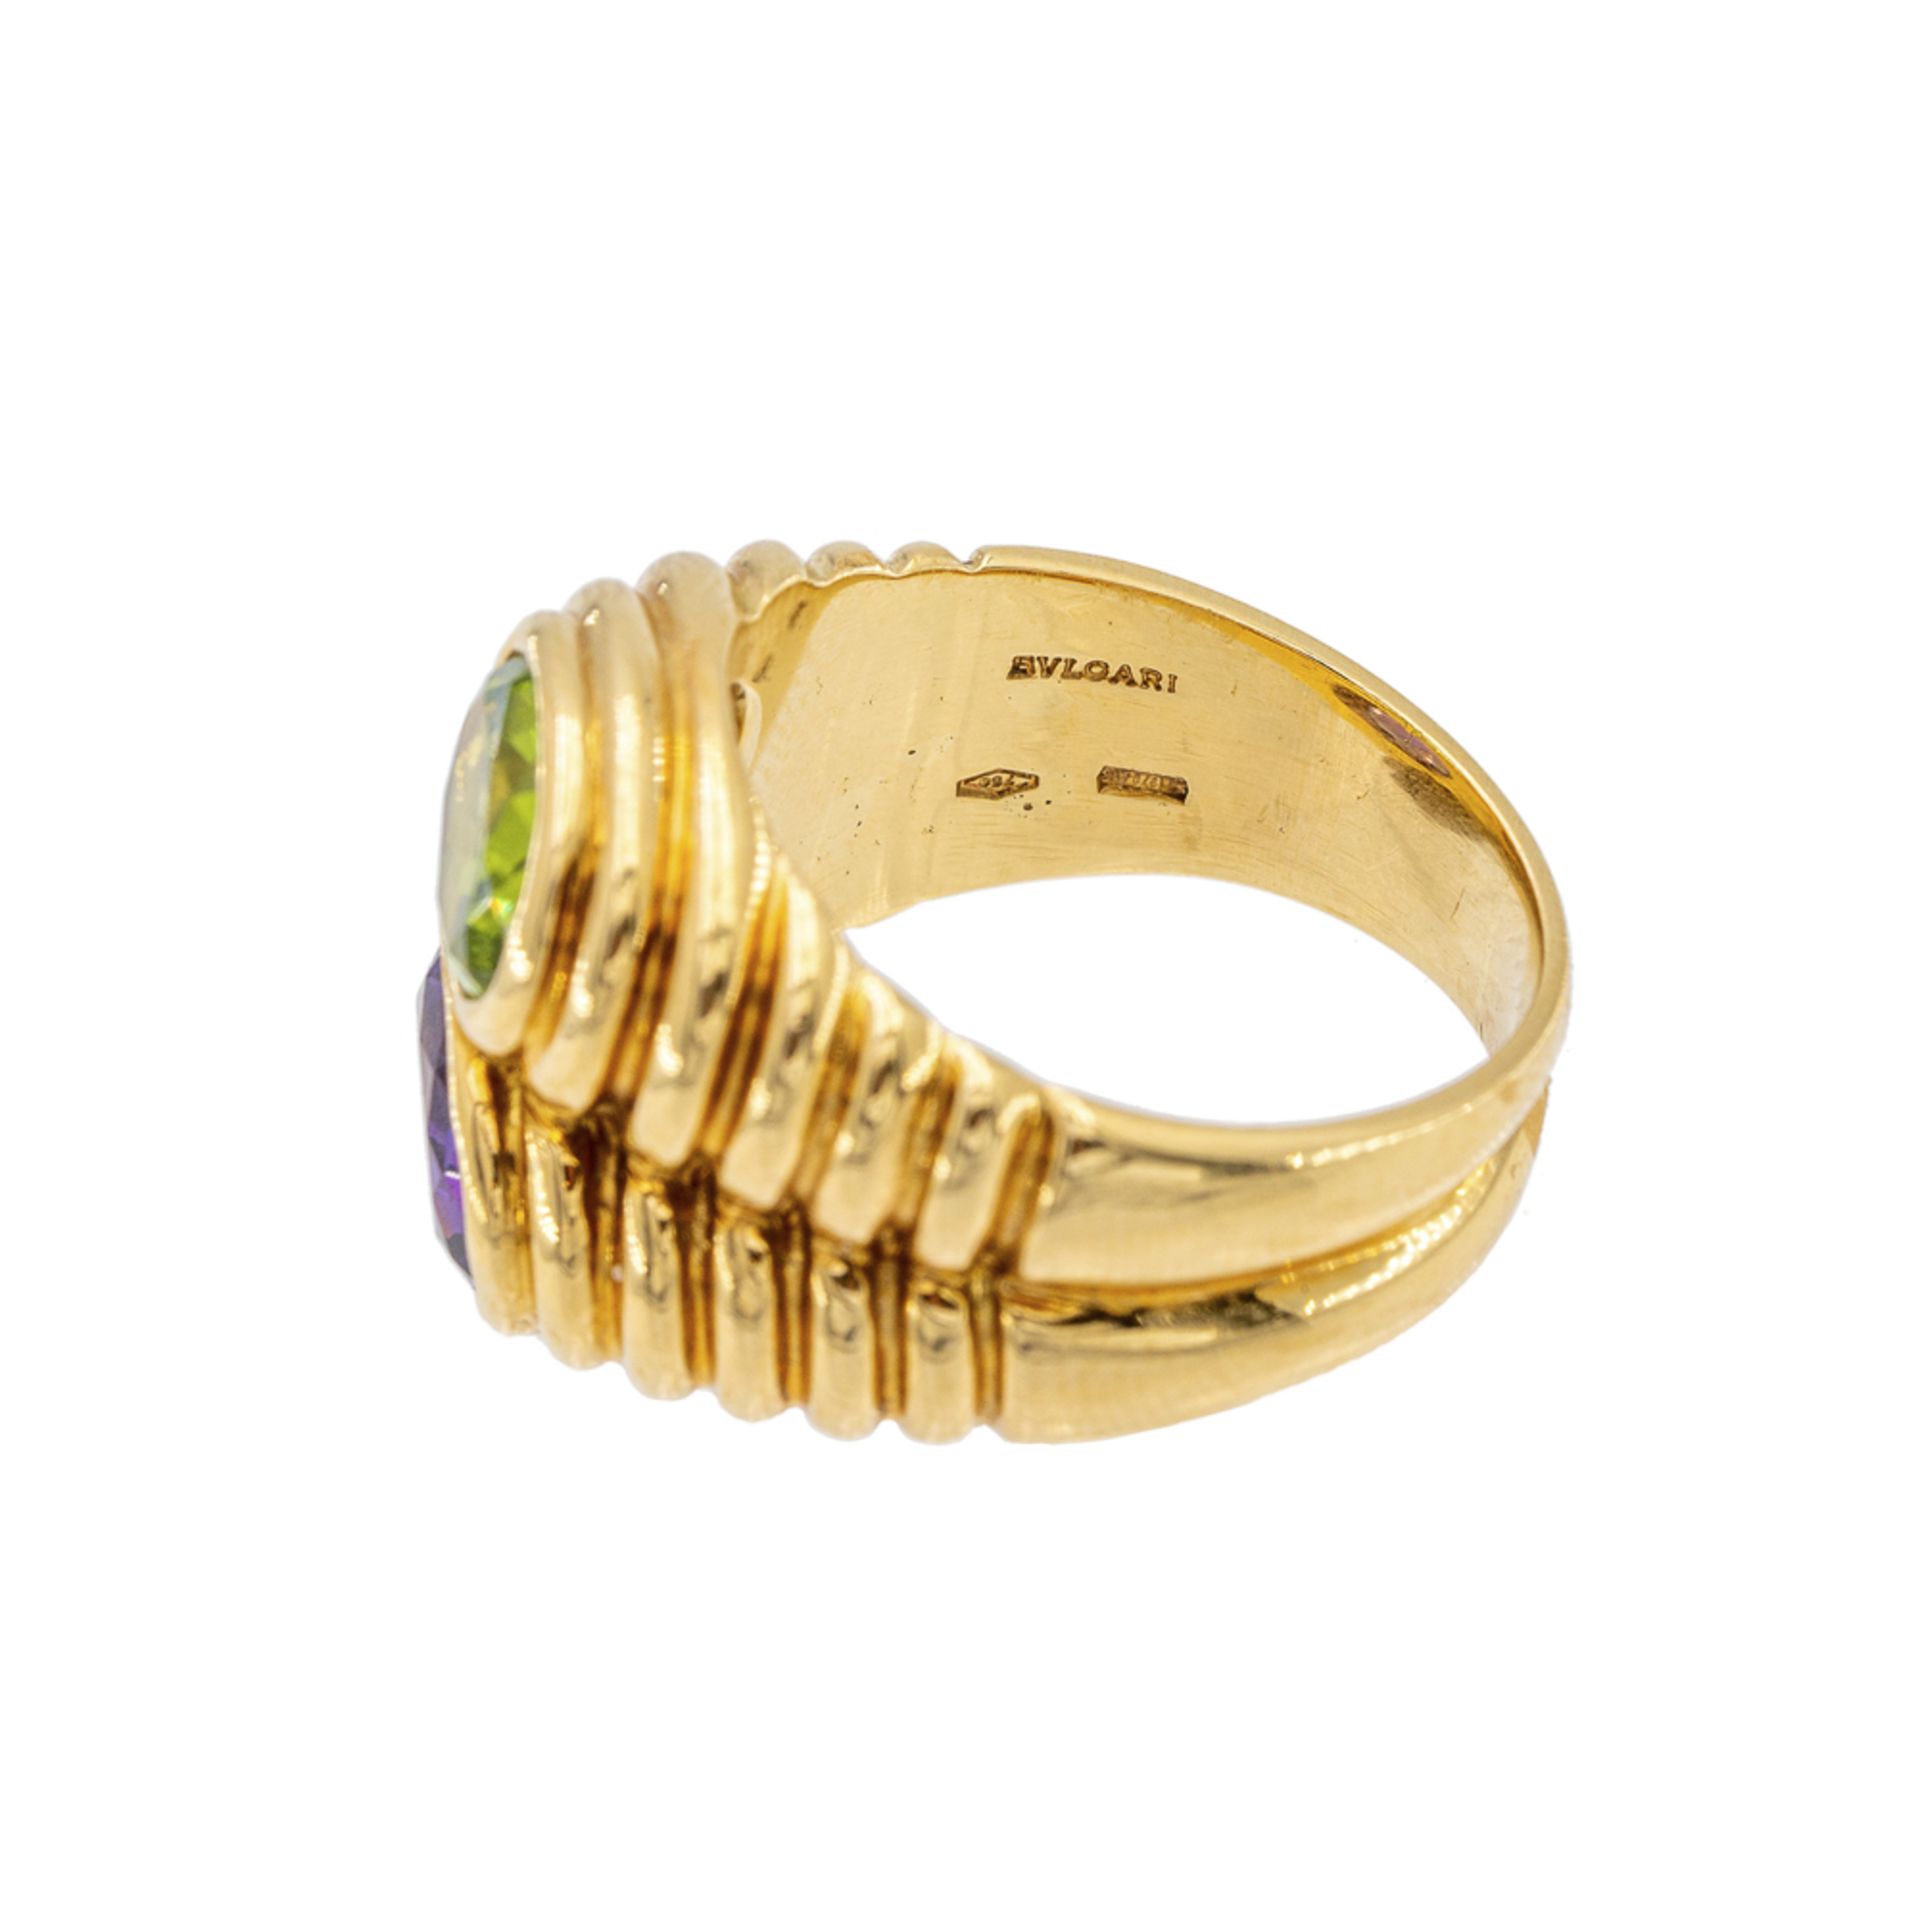 Bulgari Double Baccellato collection ring - Image 3 of 3